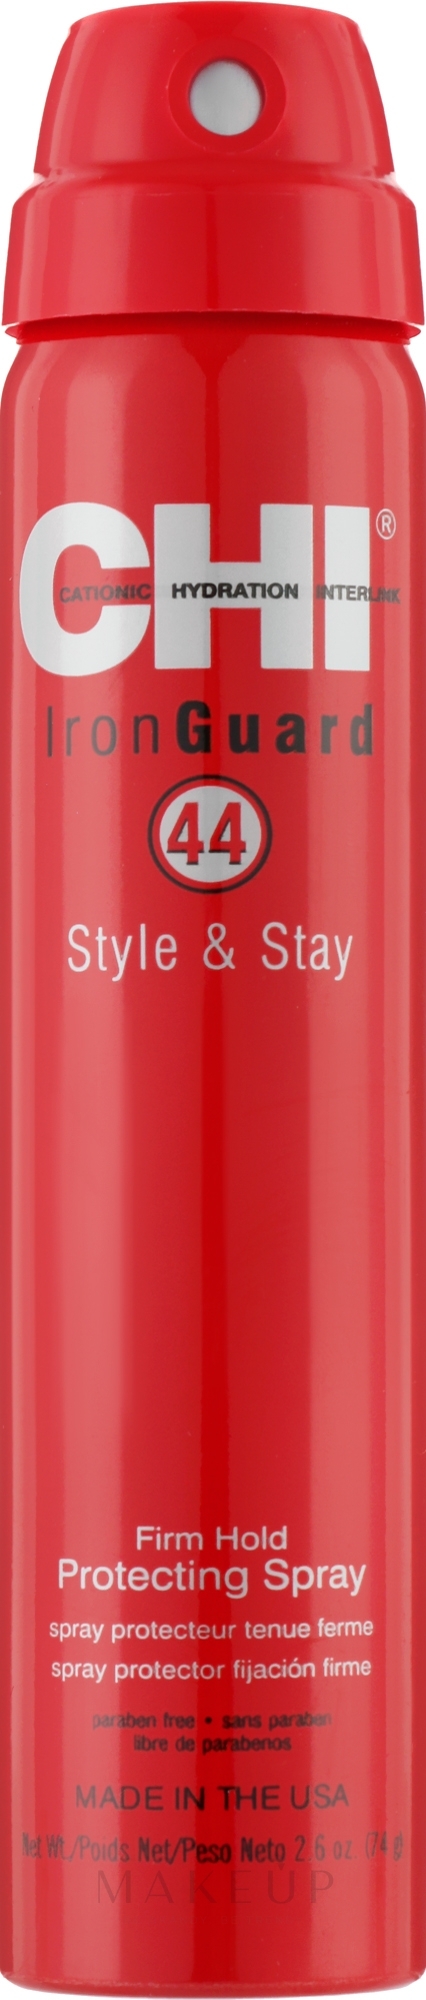 Fixierender Haarlack mit Thermoschutz - CHI 44 Iron Guard Style & Stay Firm Hold Protecting Spray — Bild 74 g